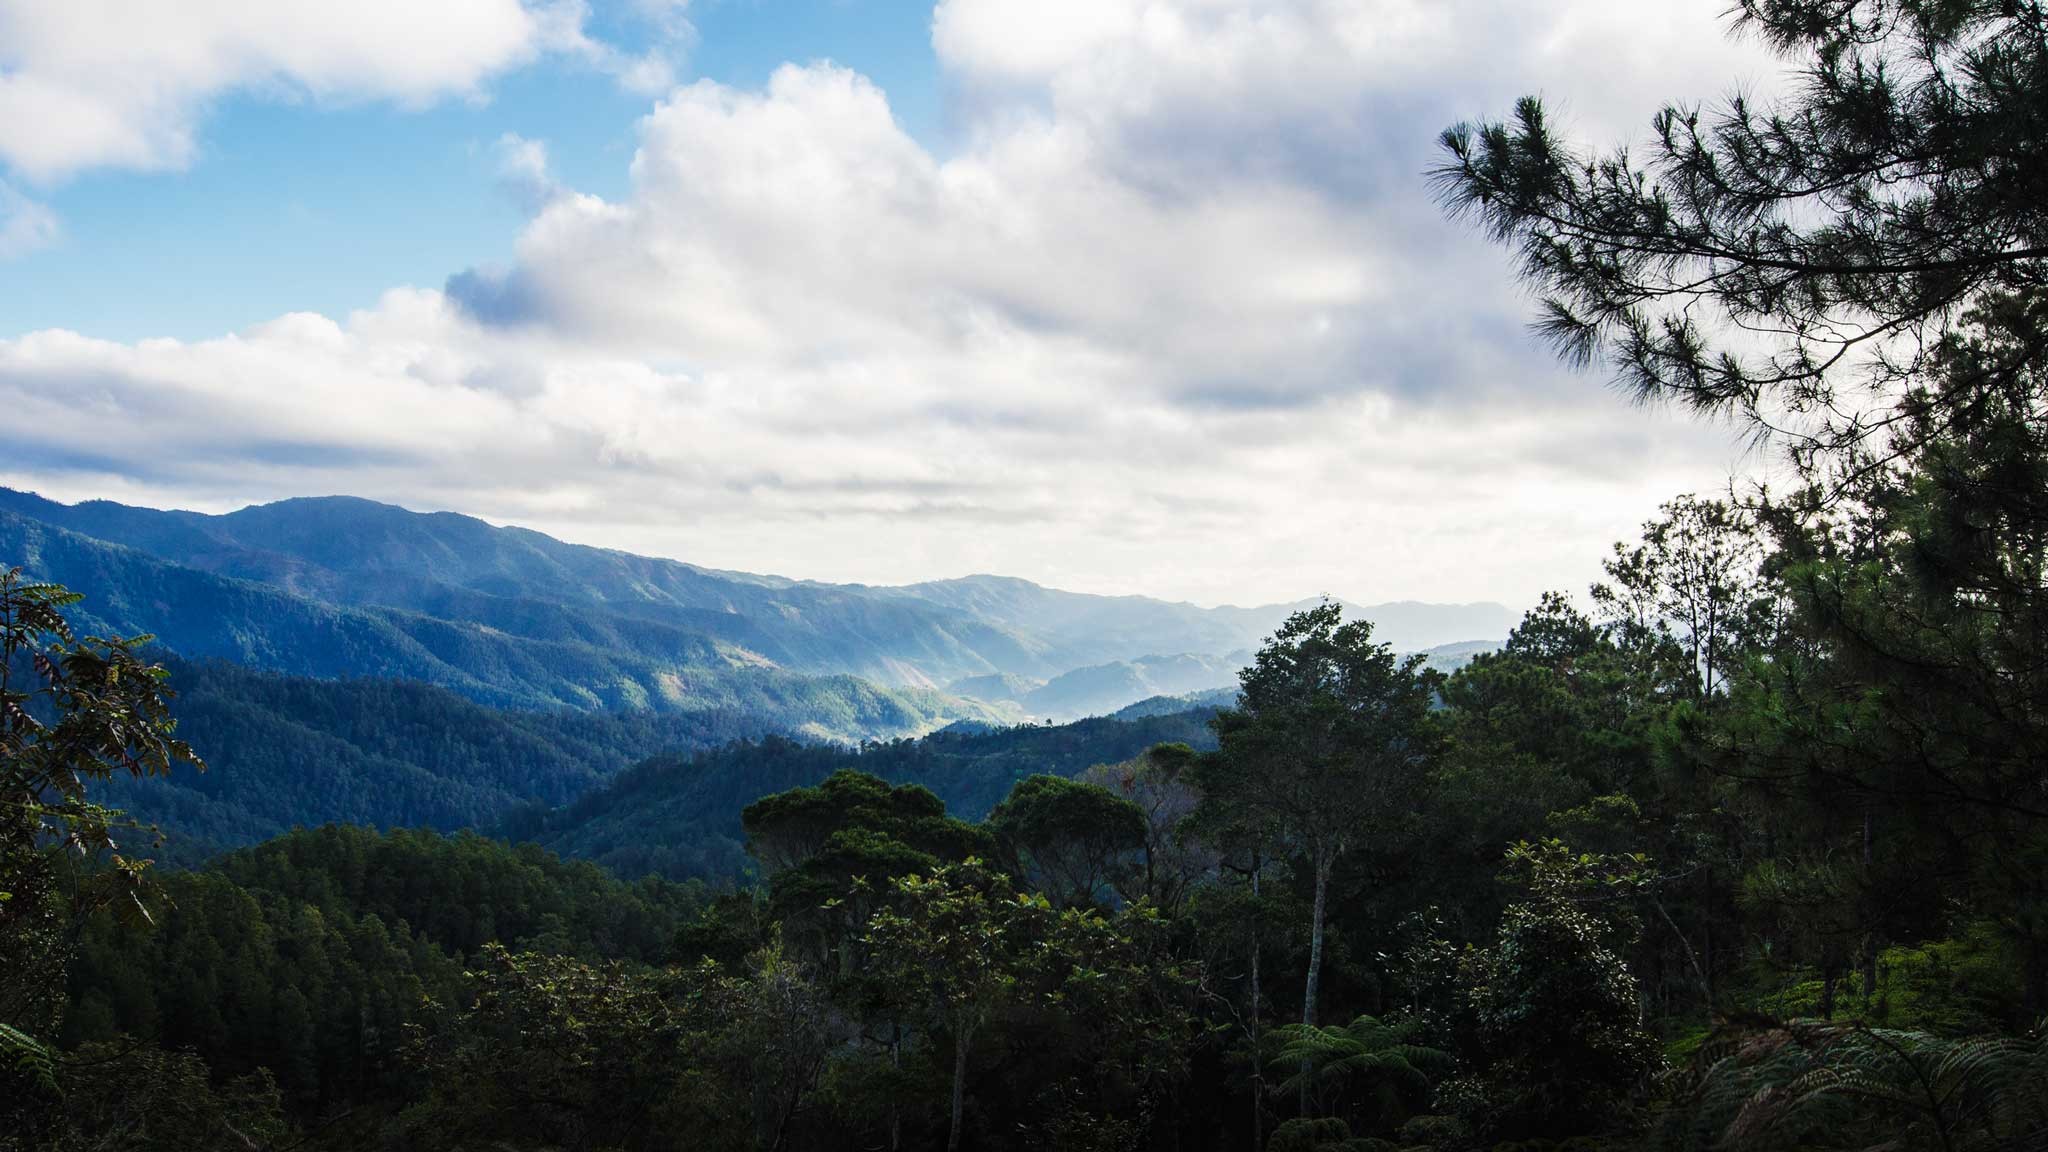 Caribbean Wallpaper Wednesday: An Amazing View of The Cordillera Central  Mountain Range | Dominican Republic |